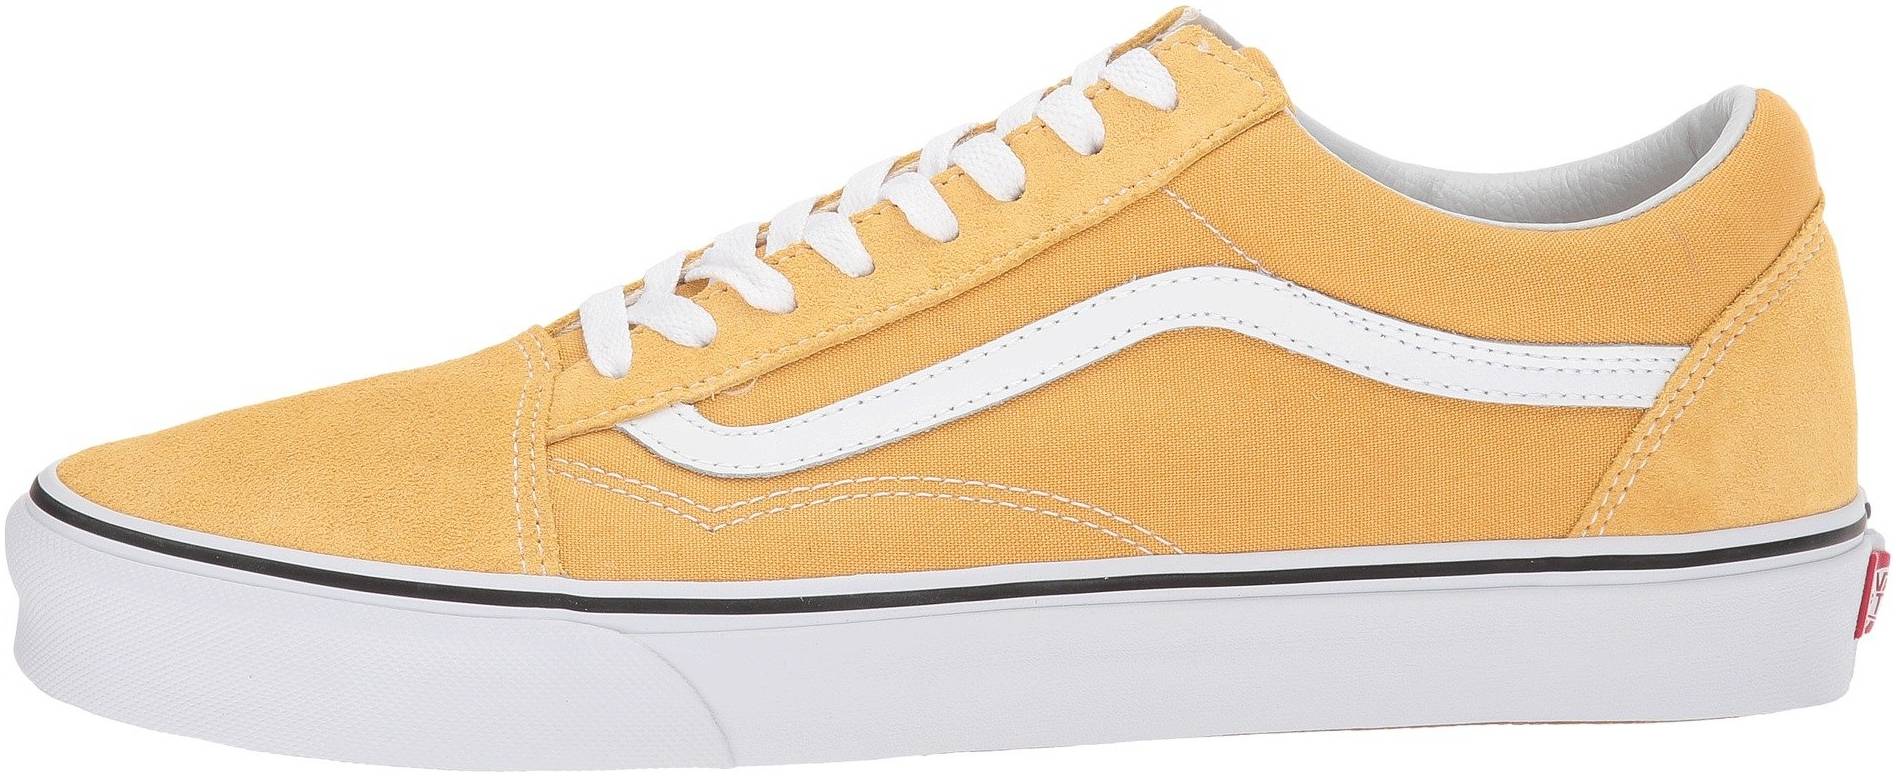 yellow shoes sneakers